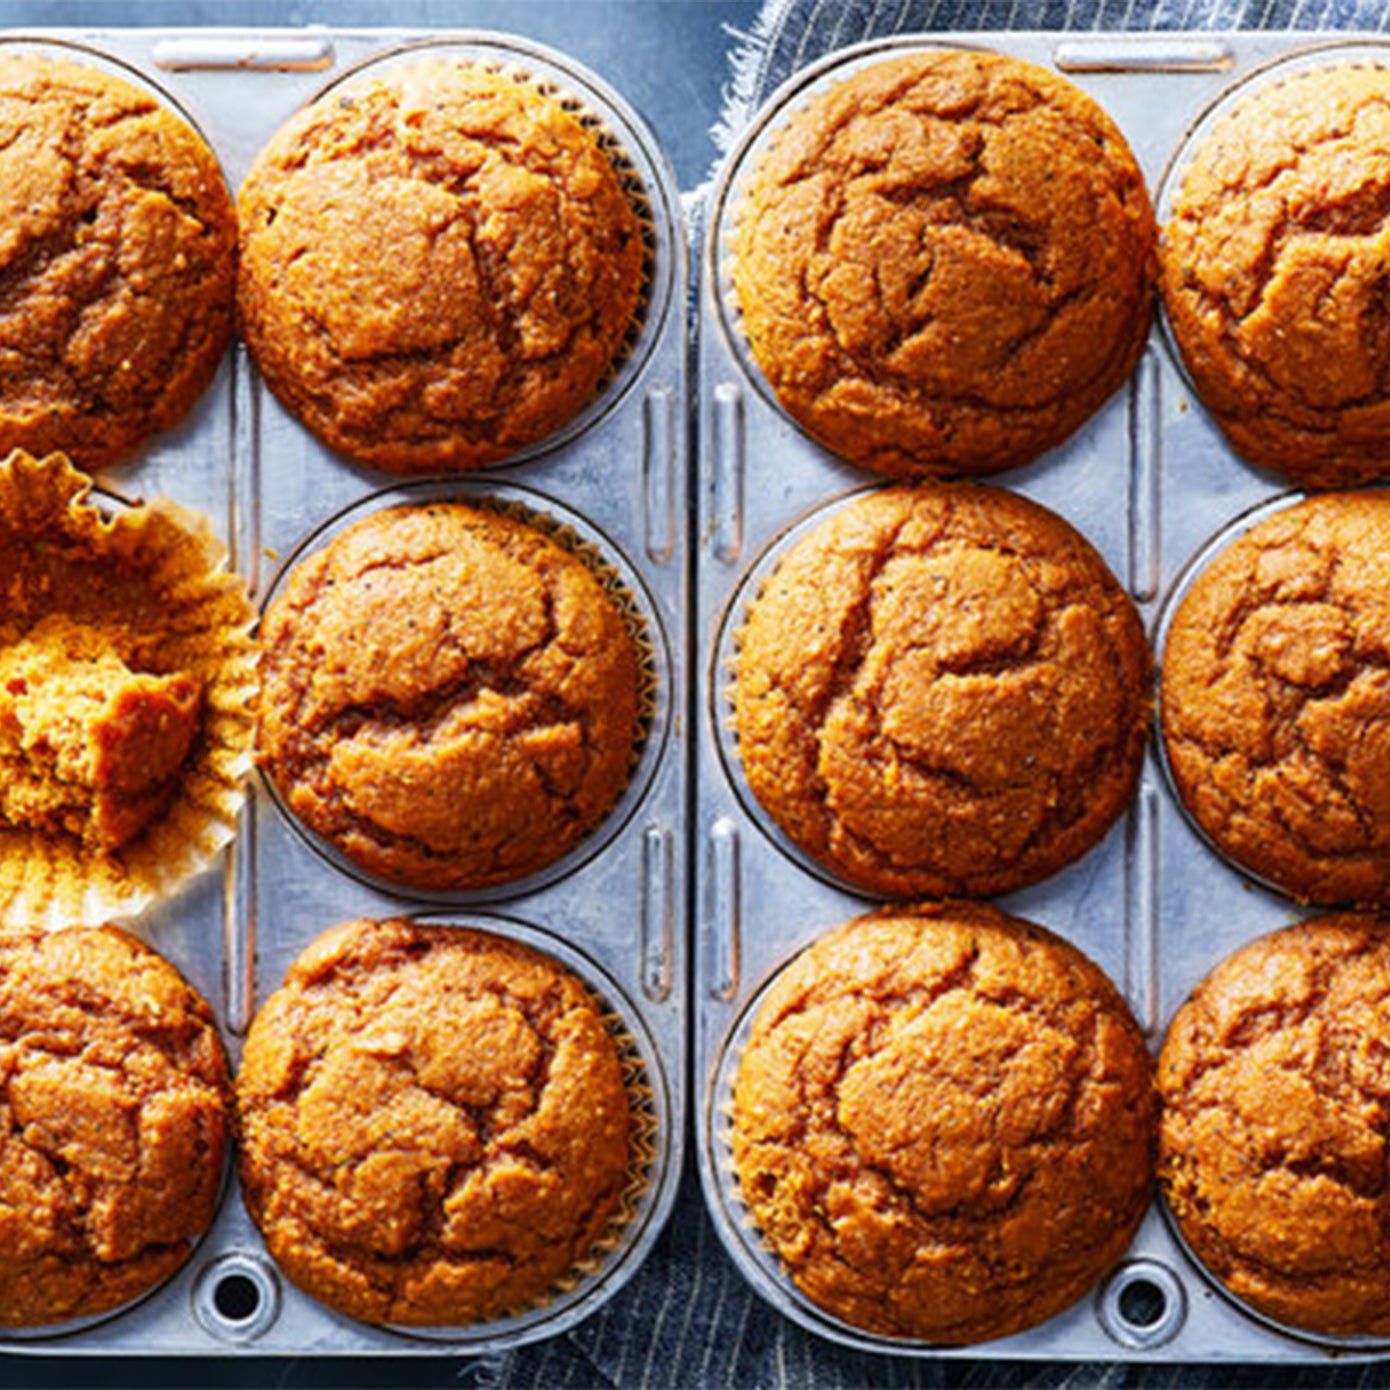 Two trays of six baked pumpkin muffins with one muffin half-eaten